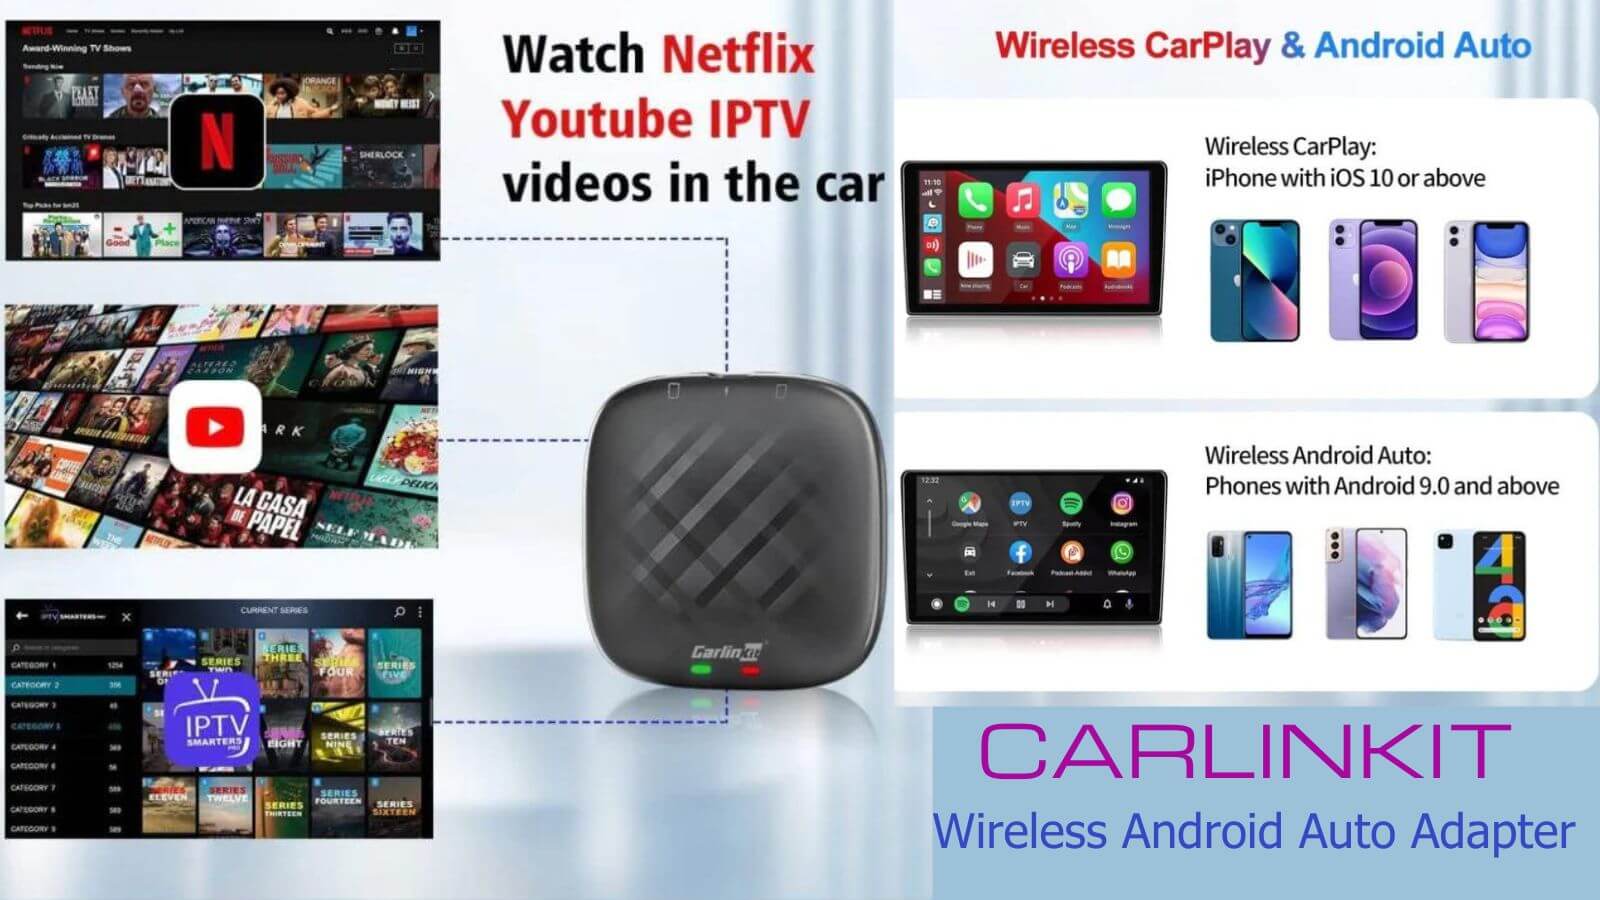 Carlinkit Ai Box Wireless Android Auto Adapter for Android Auto